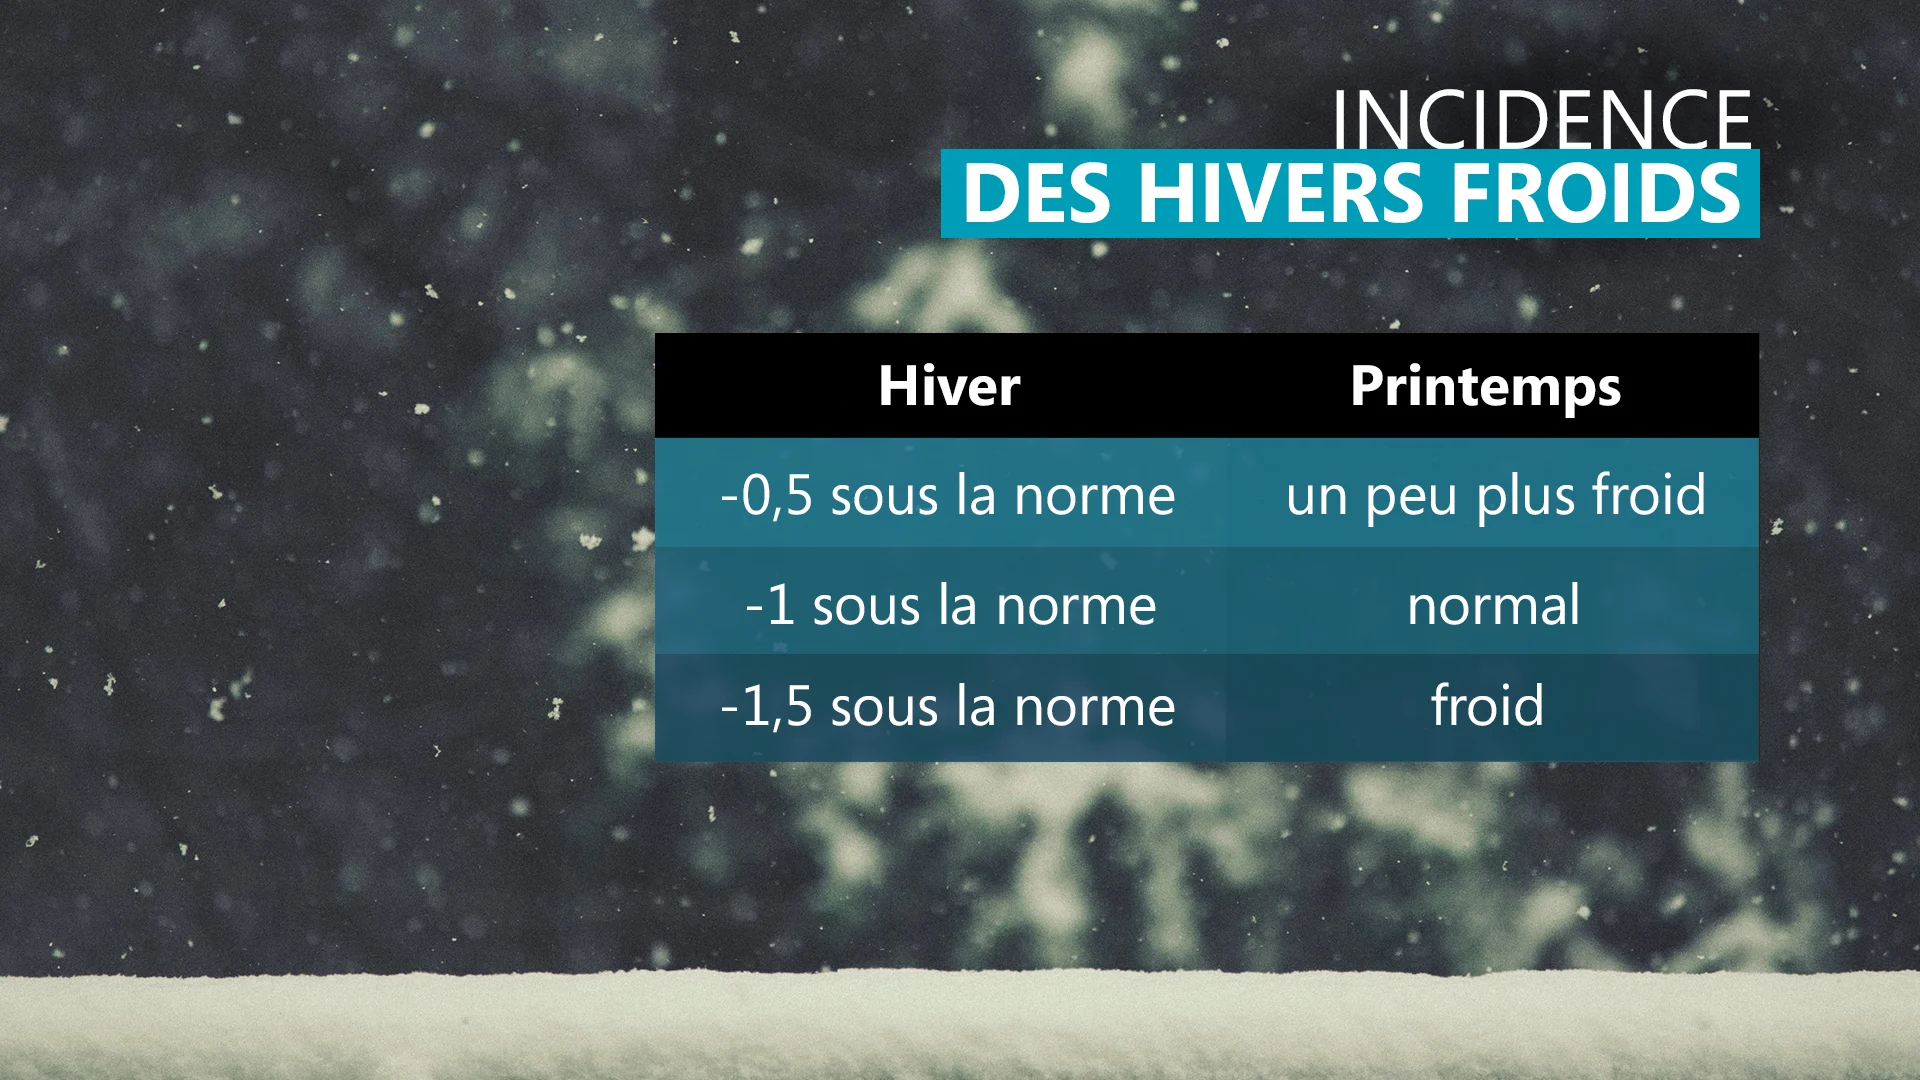 Incidence des hivers froids